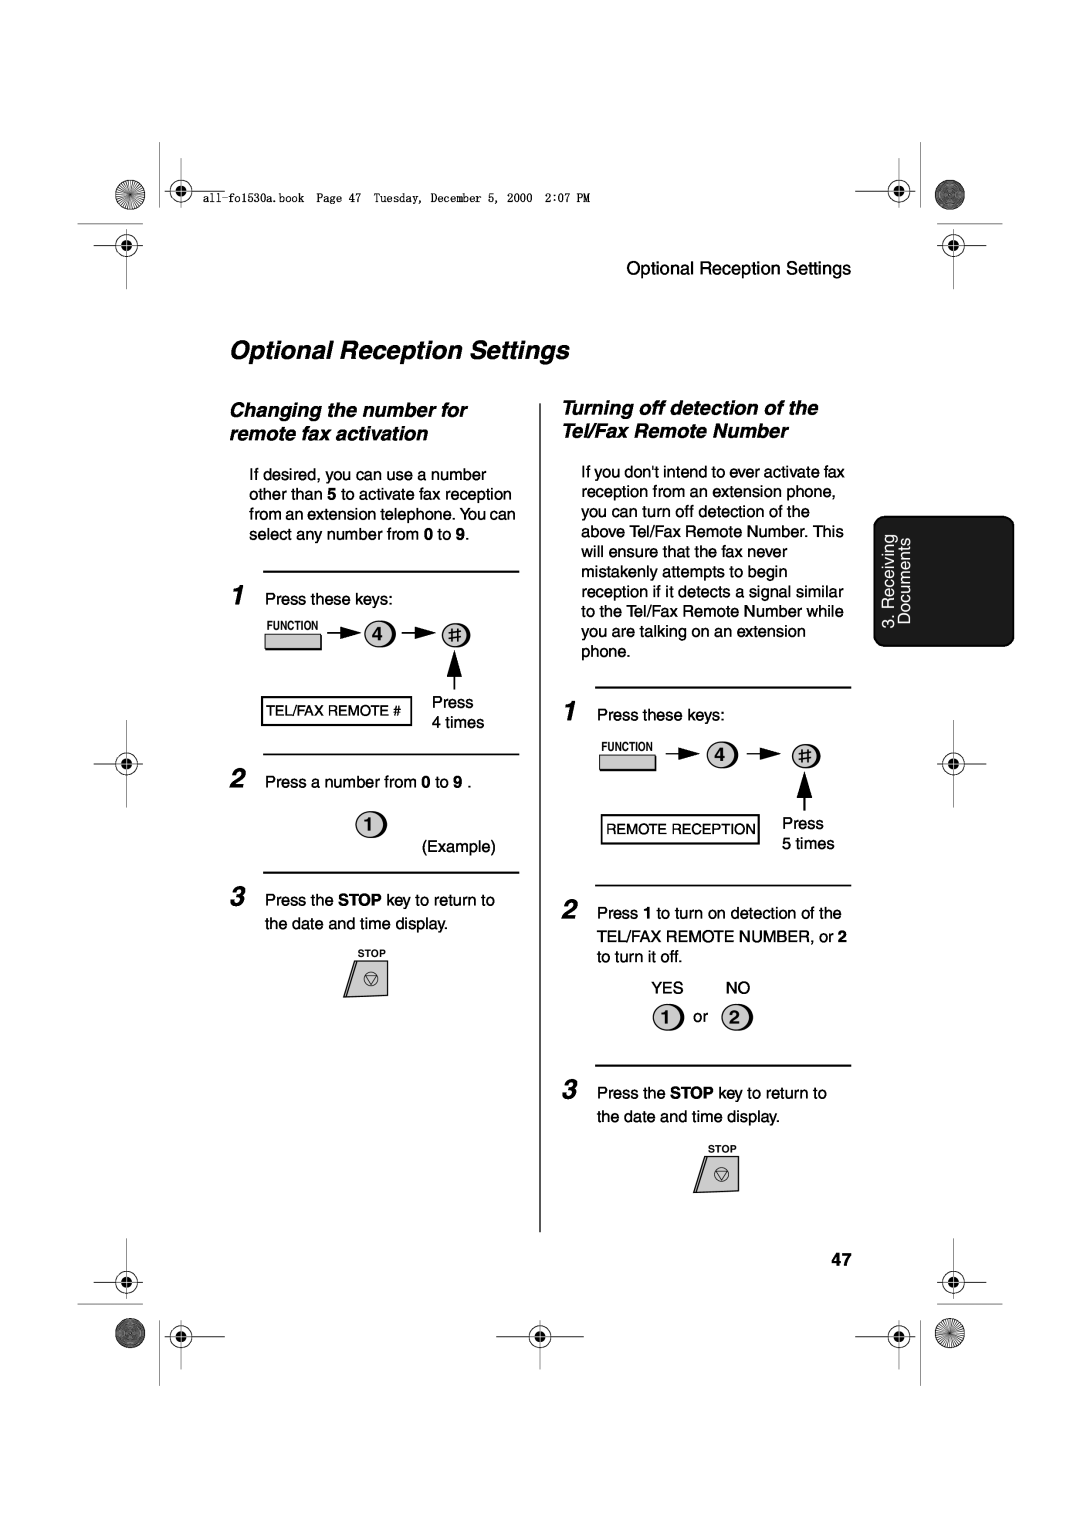 Sharp FO-1530 Optional Reception Settings, Changing the number for remote fax activation, 1 or, Receiving Documents 